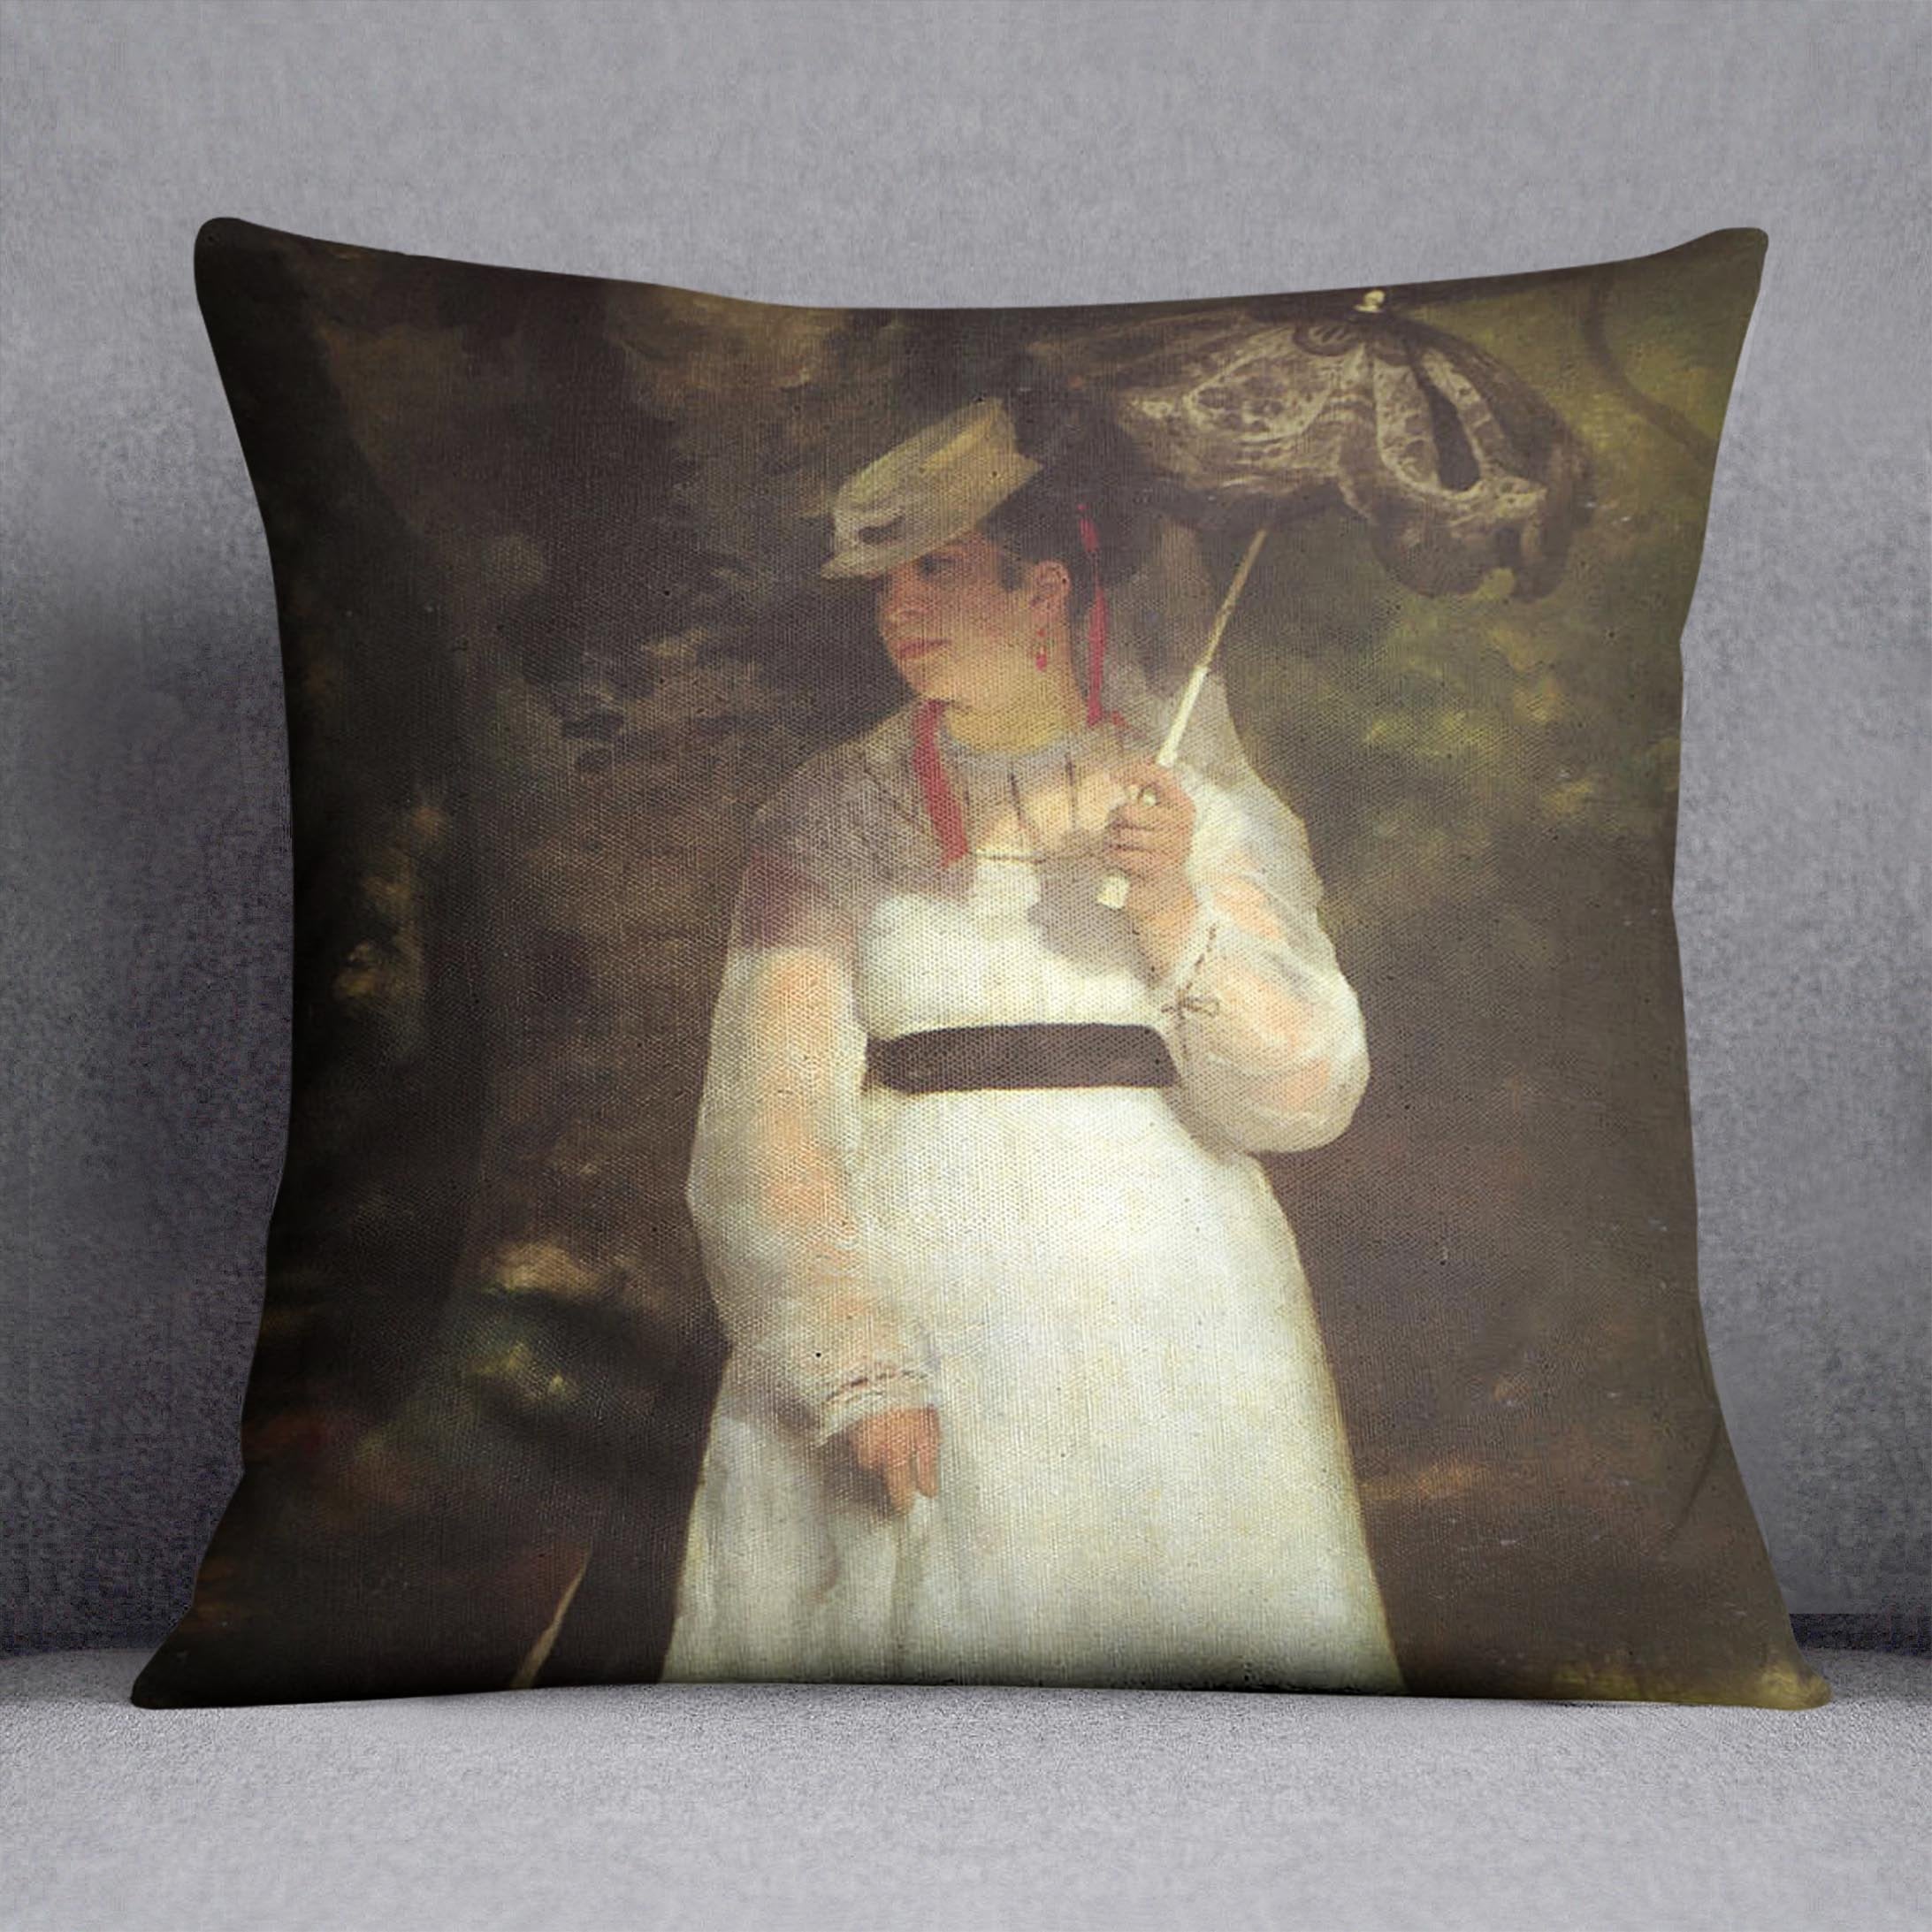 Lise with an Umbrella by Renoir Throw Pillow